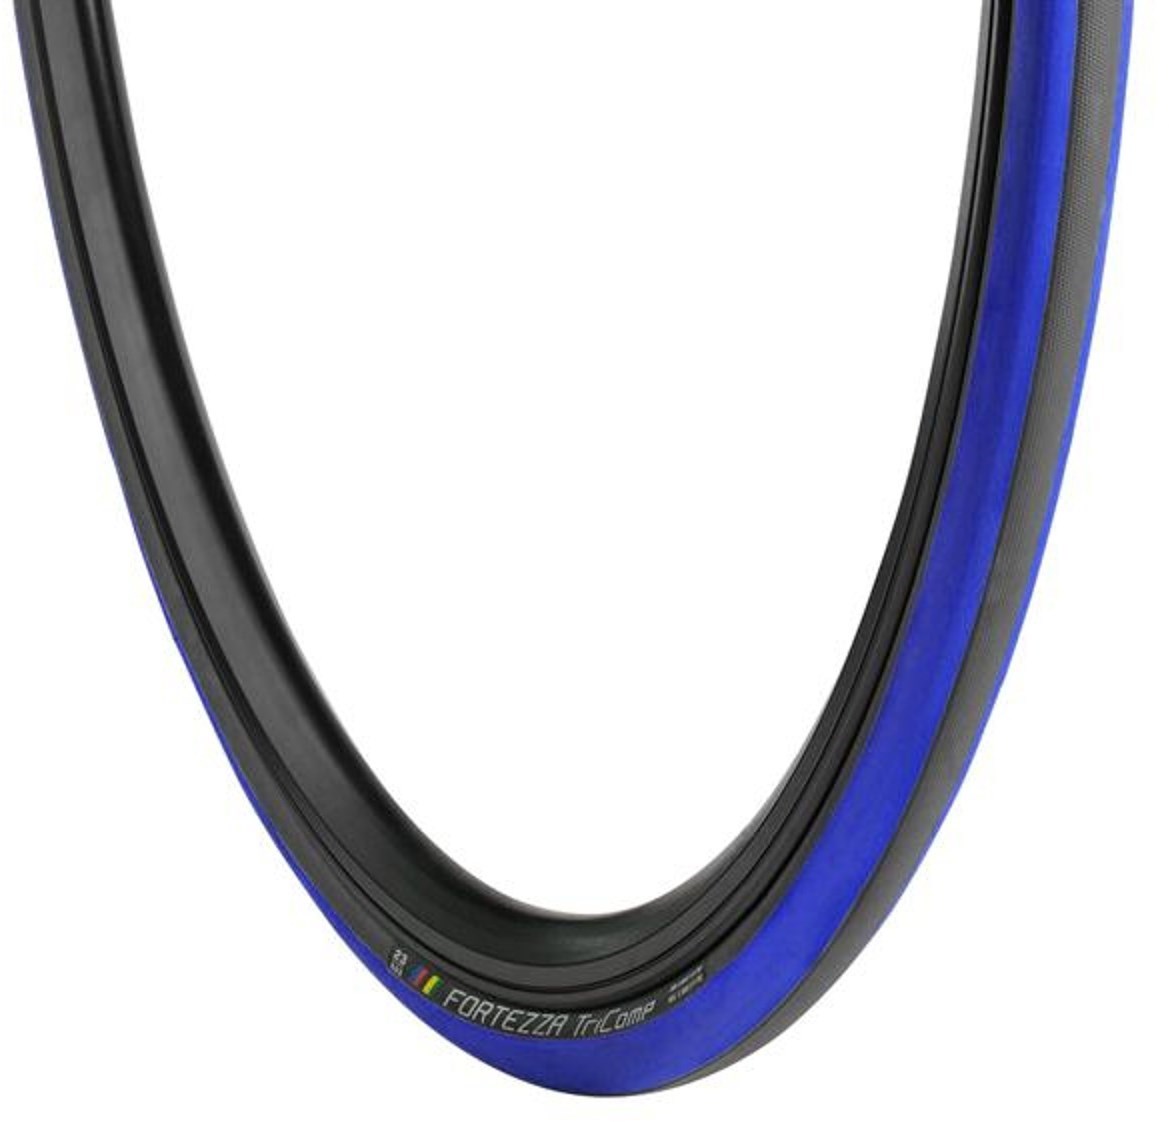 Vredestein Fortezza TriComp Road Clincher Tyre product image